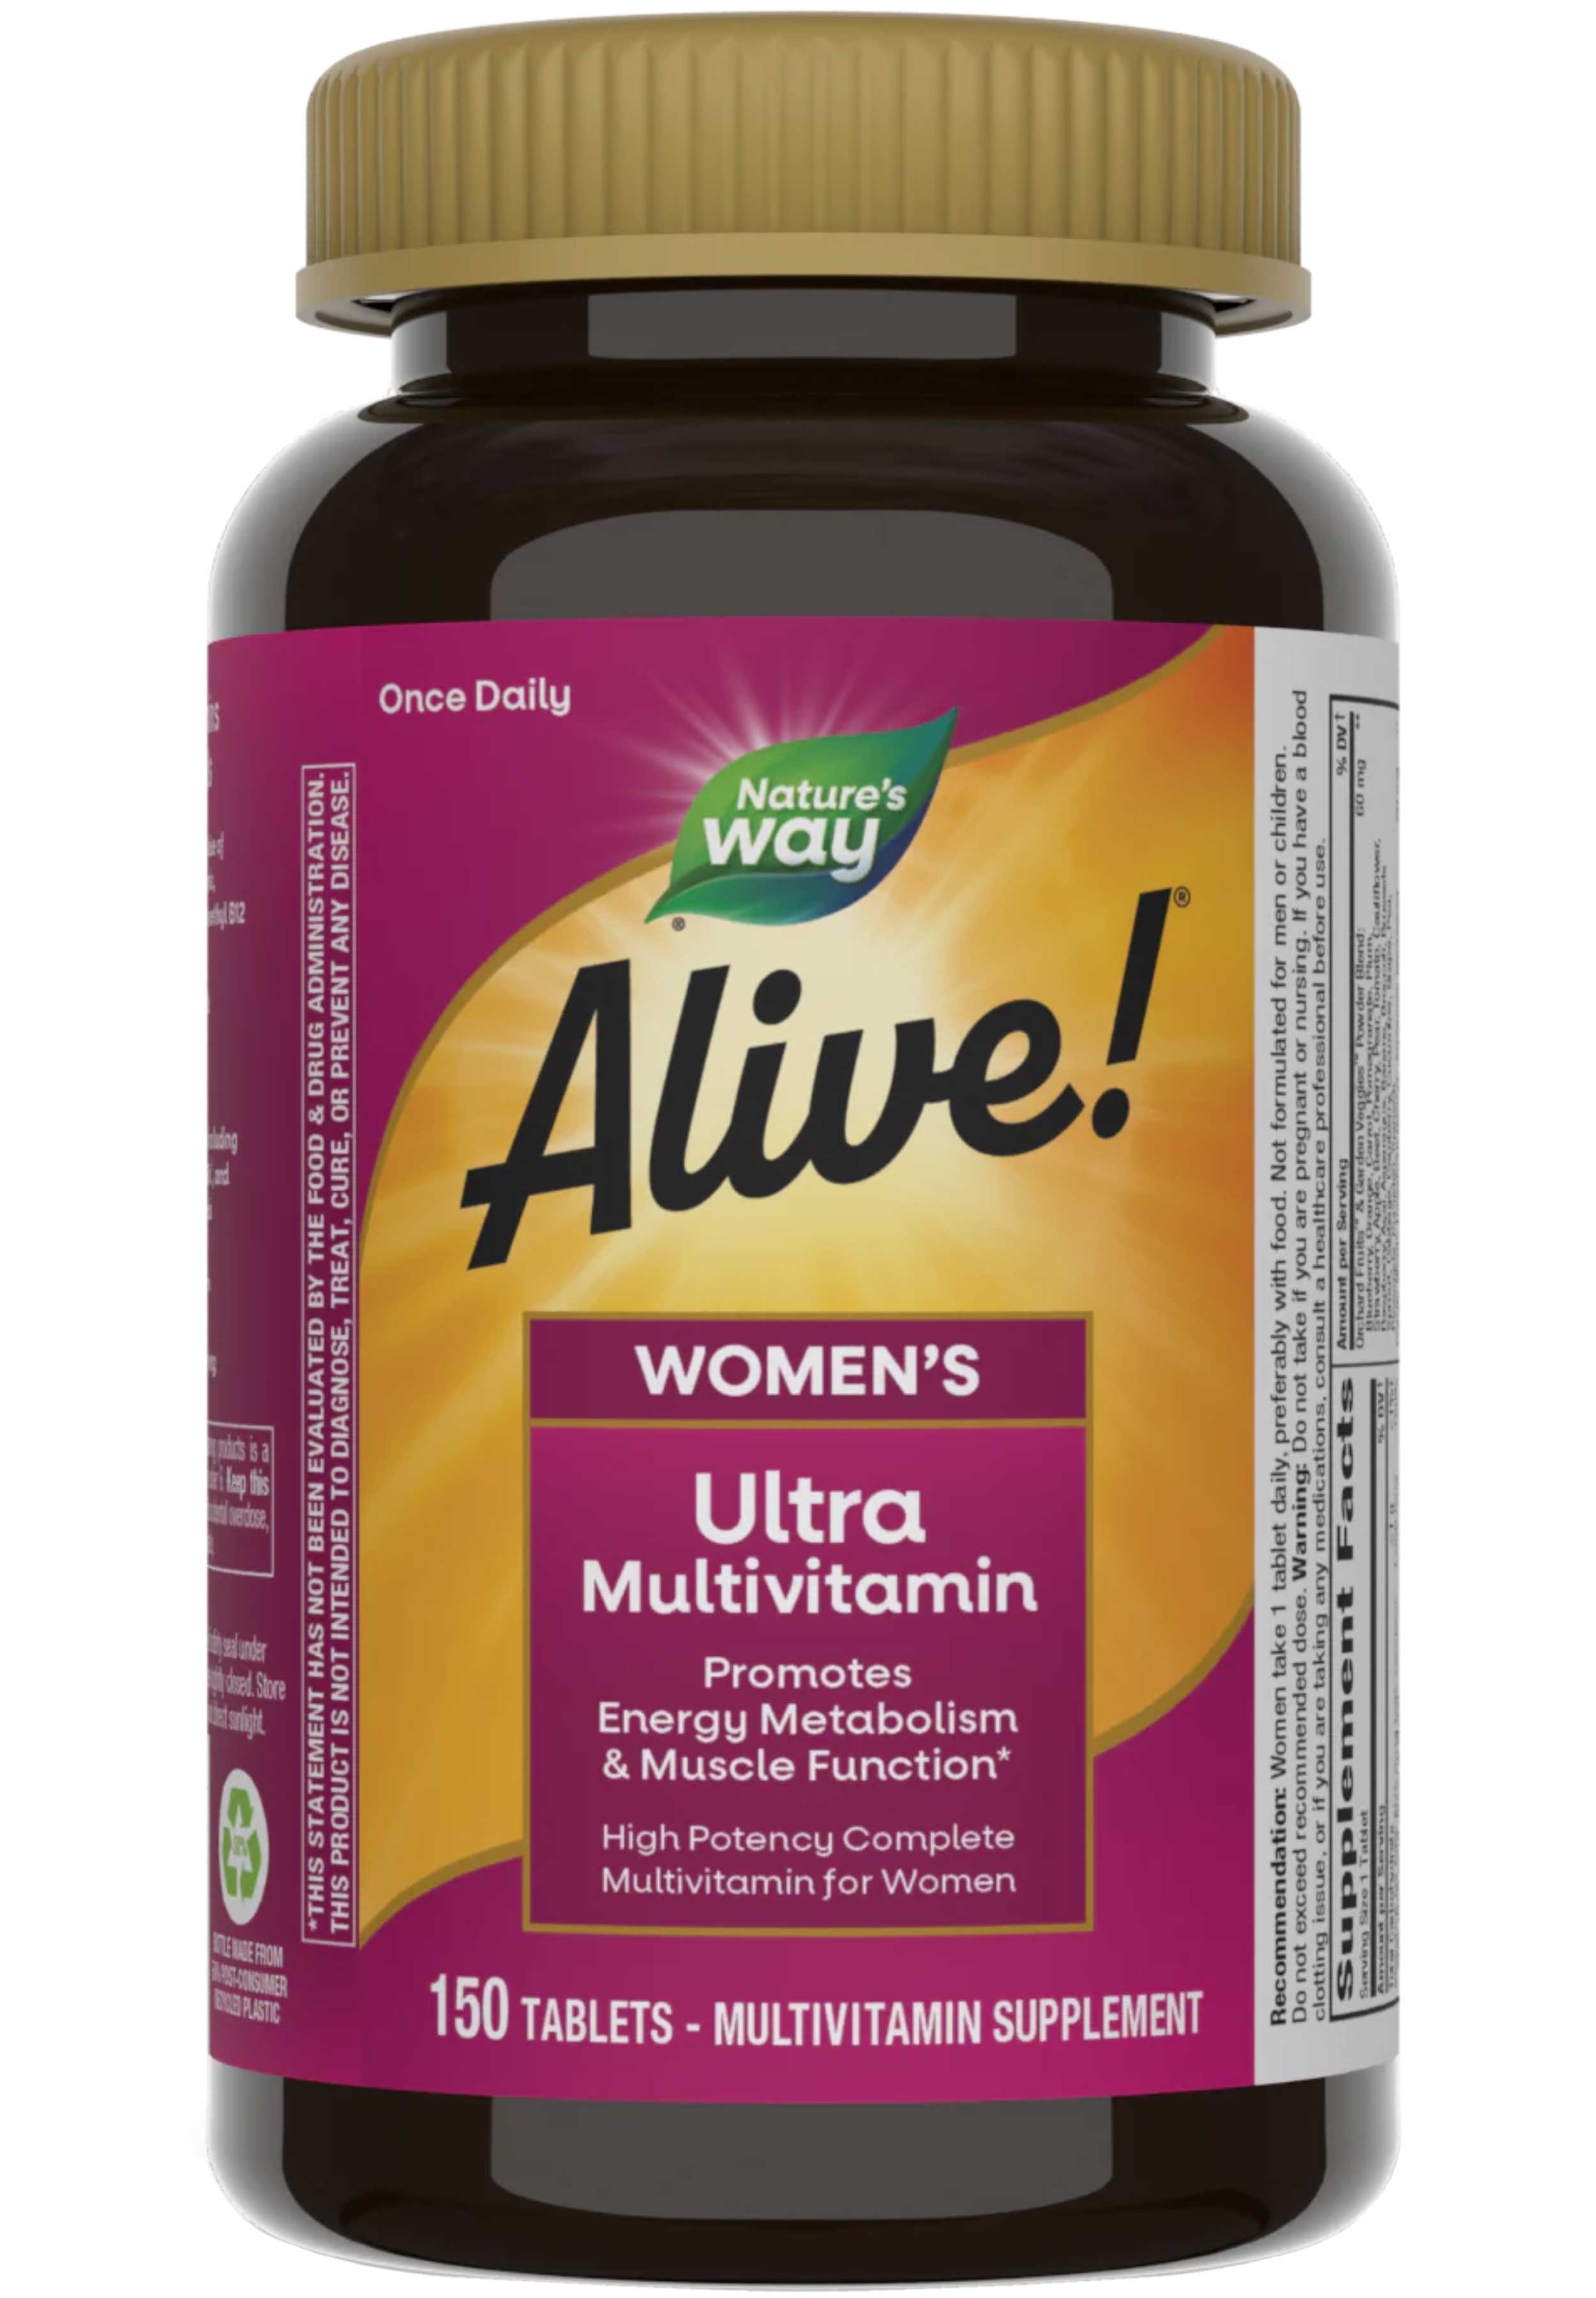 Nature's Way Alive! Once Daily Women's Ultra Potency